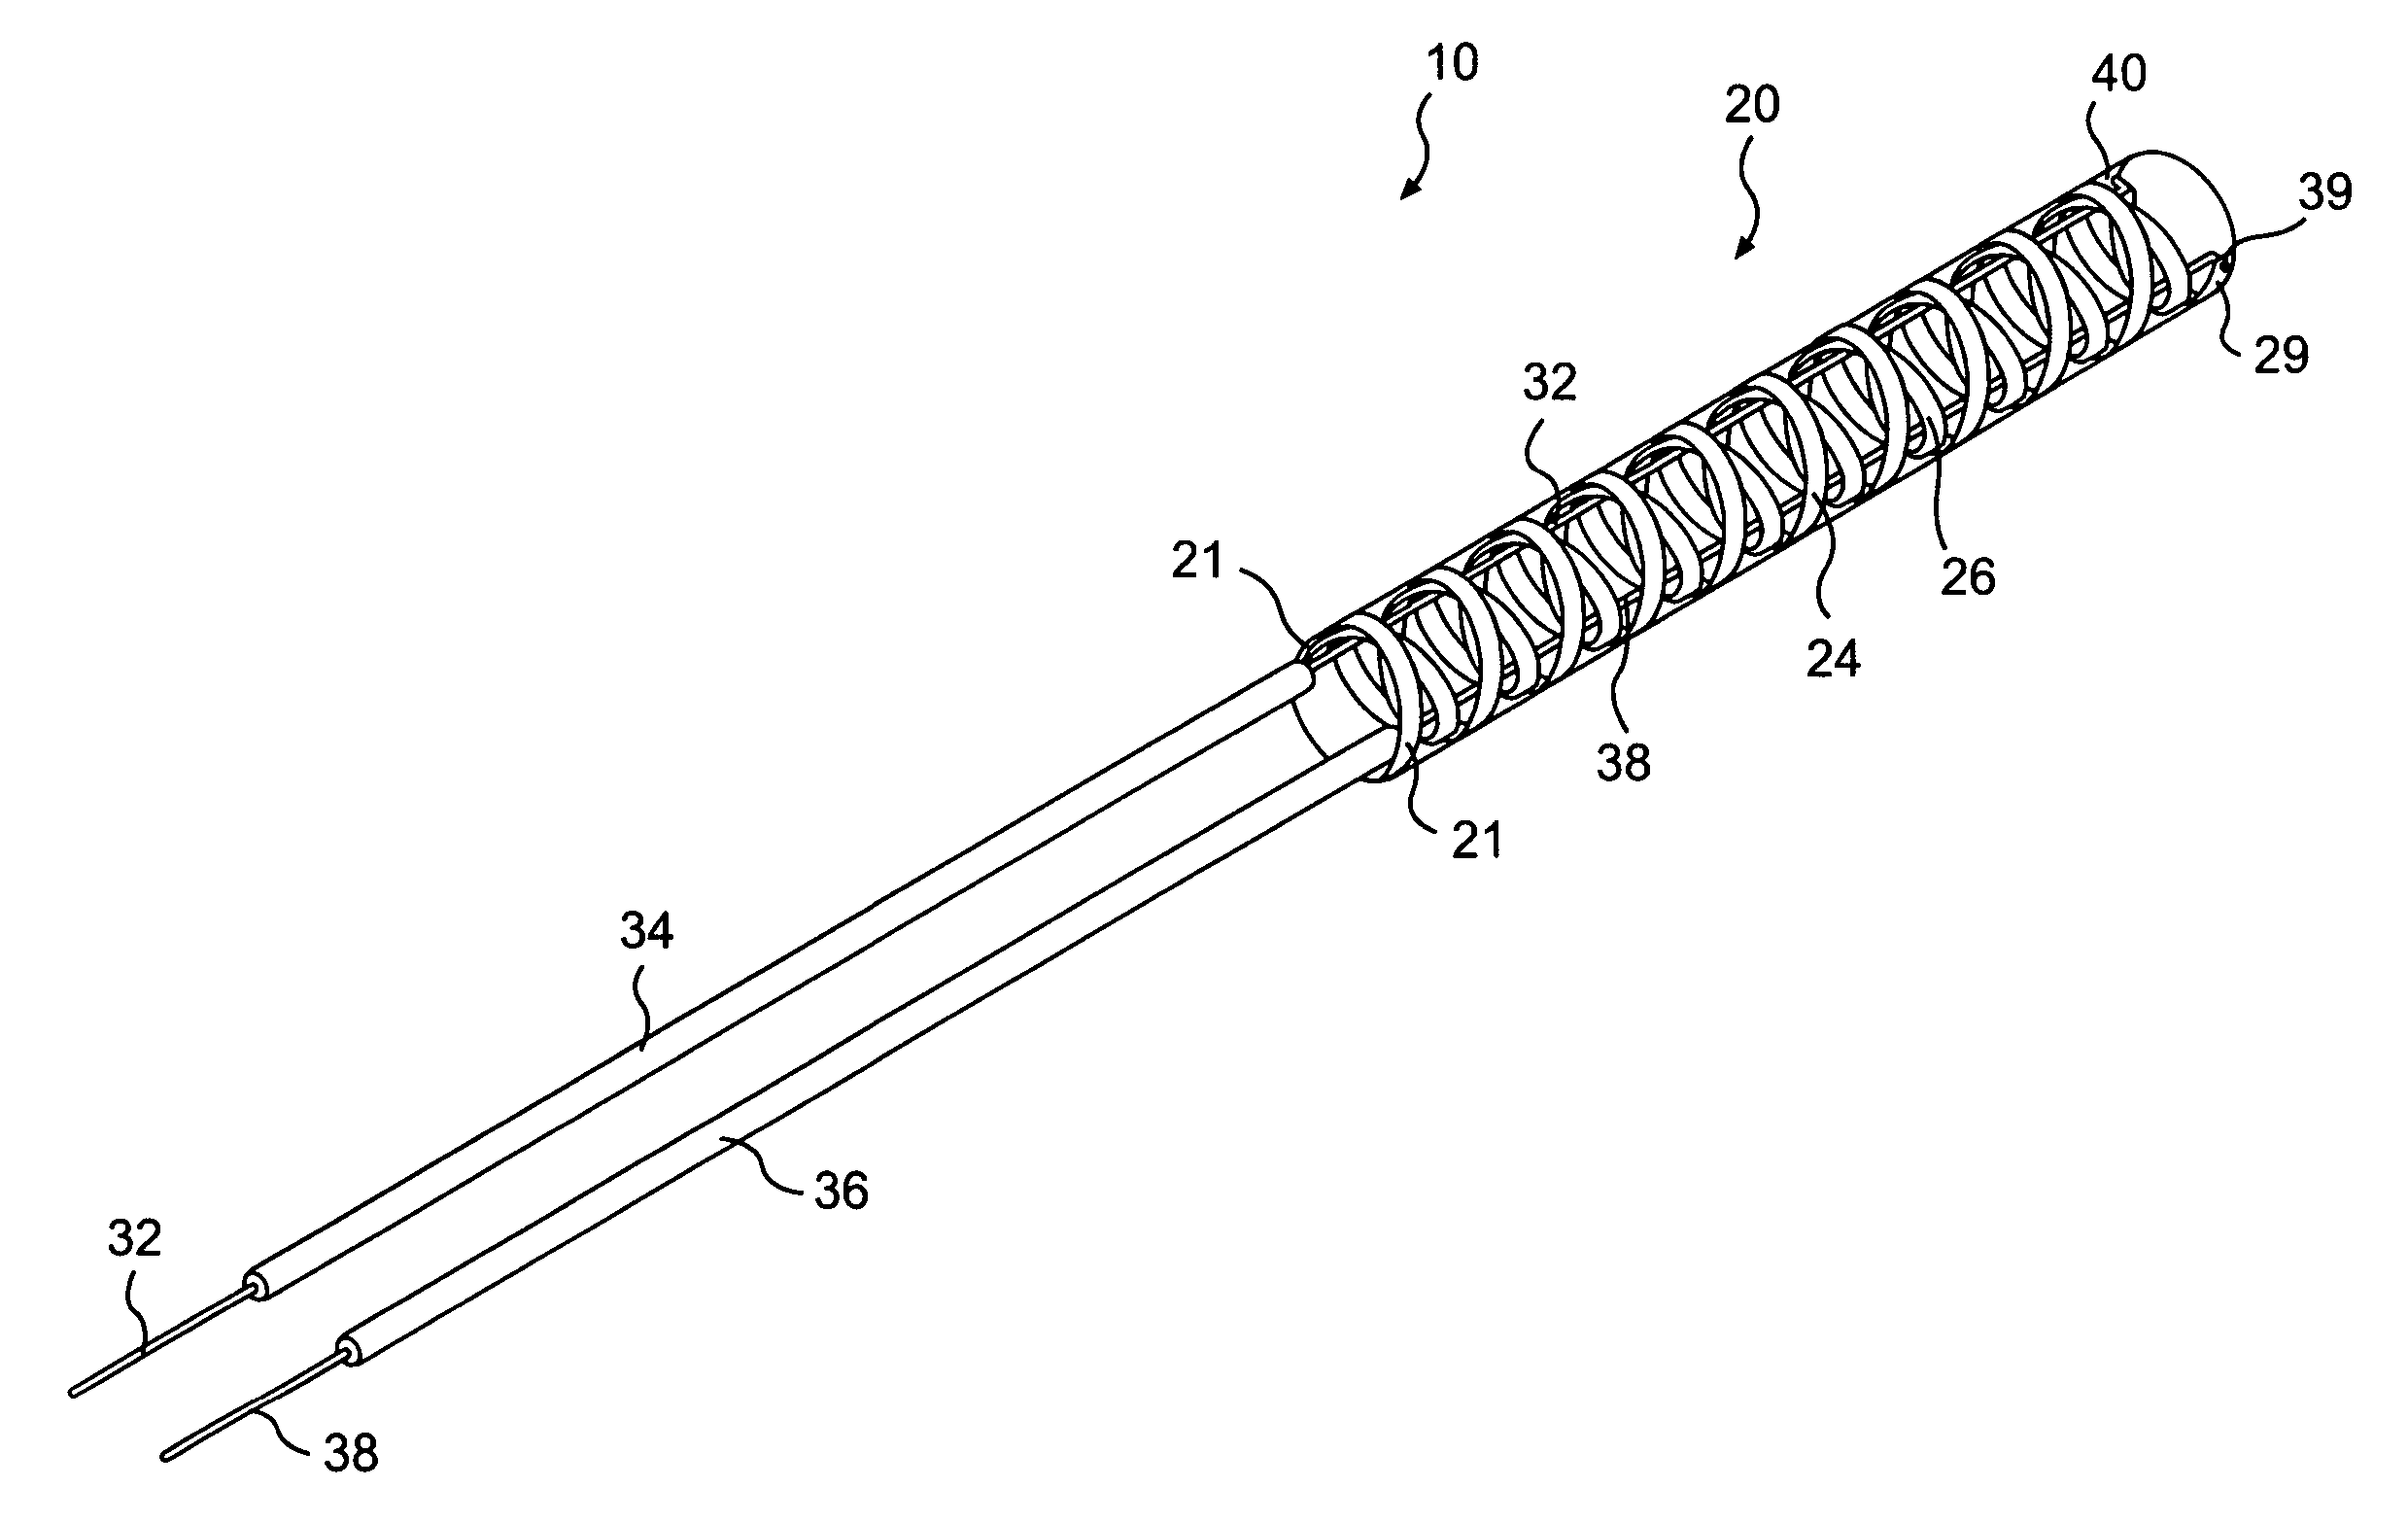 Access catheter having dilation capability and related methods